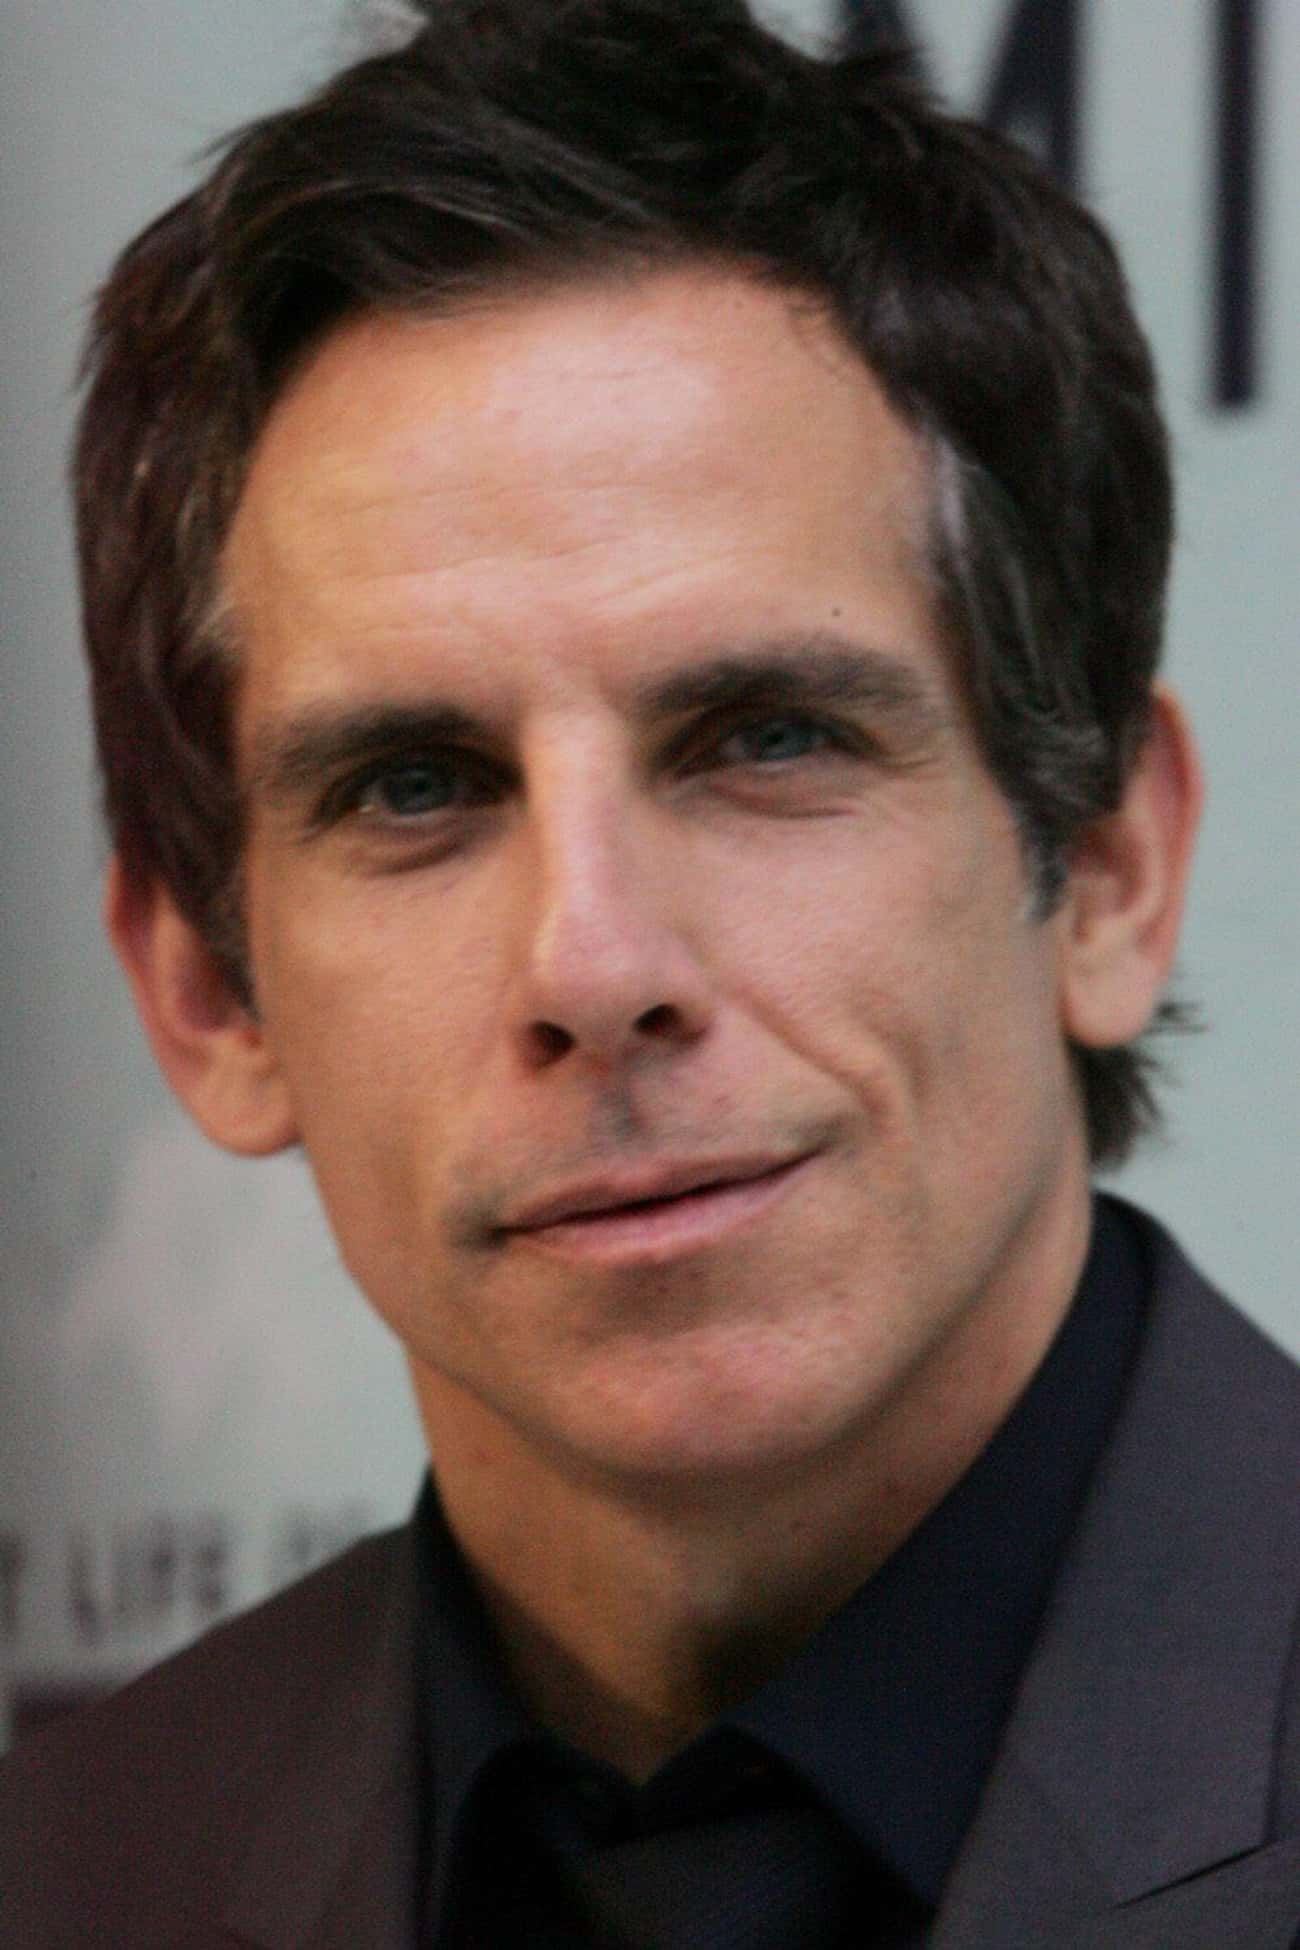 They Share A Curious Ben Stiller Connection